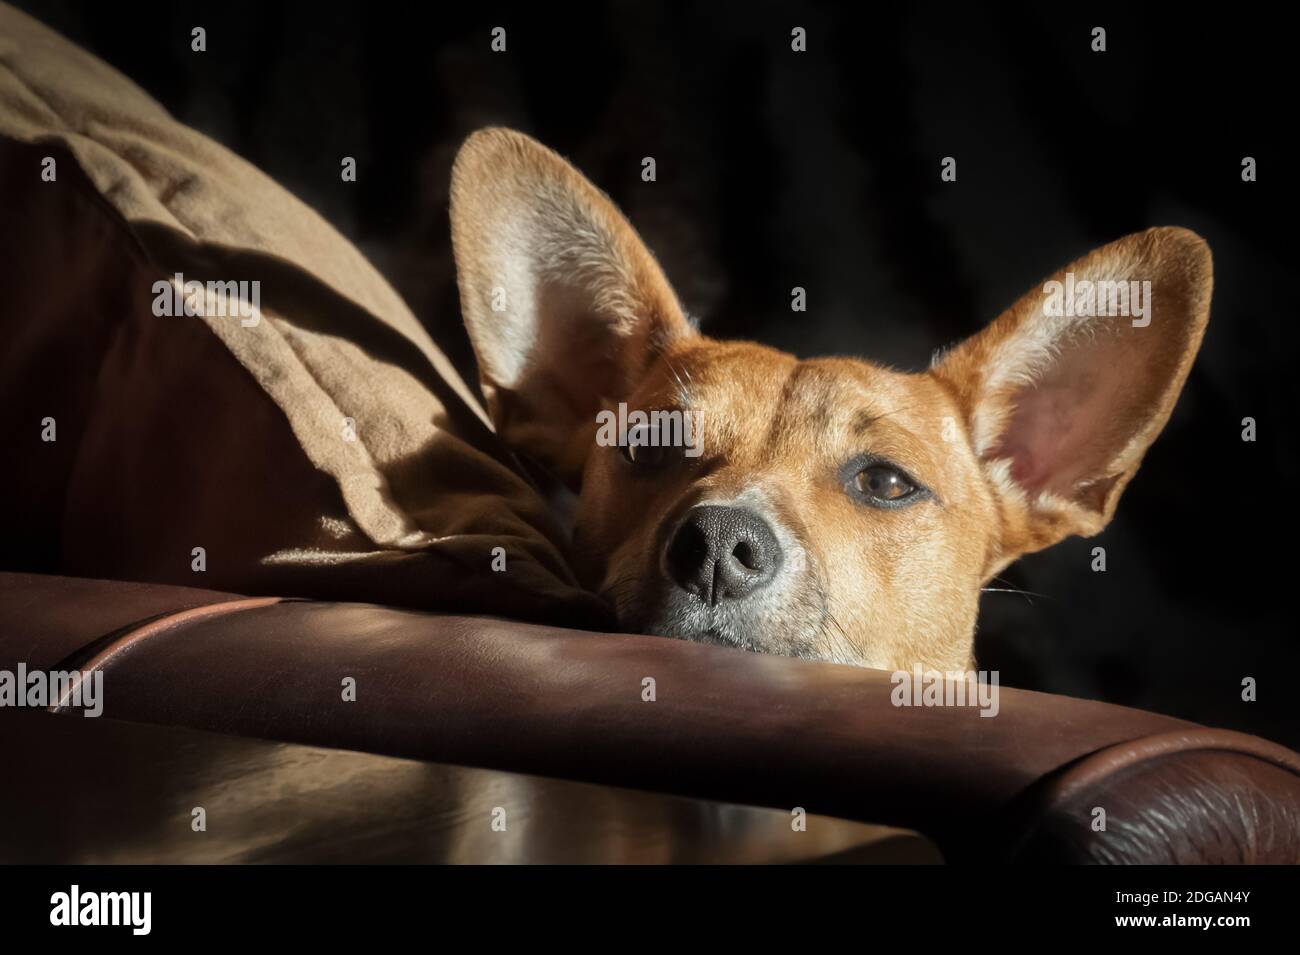 dog with large ears on a leather sofa in sunlight Stock Photo